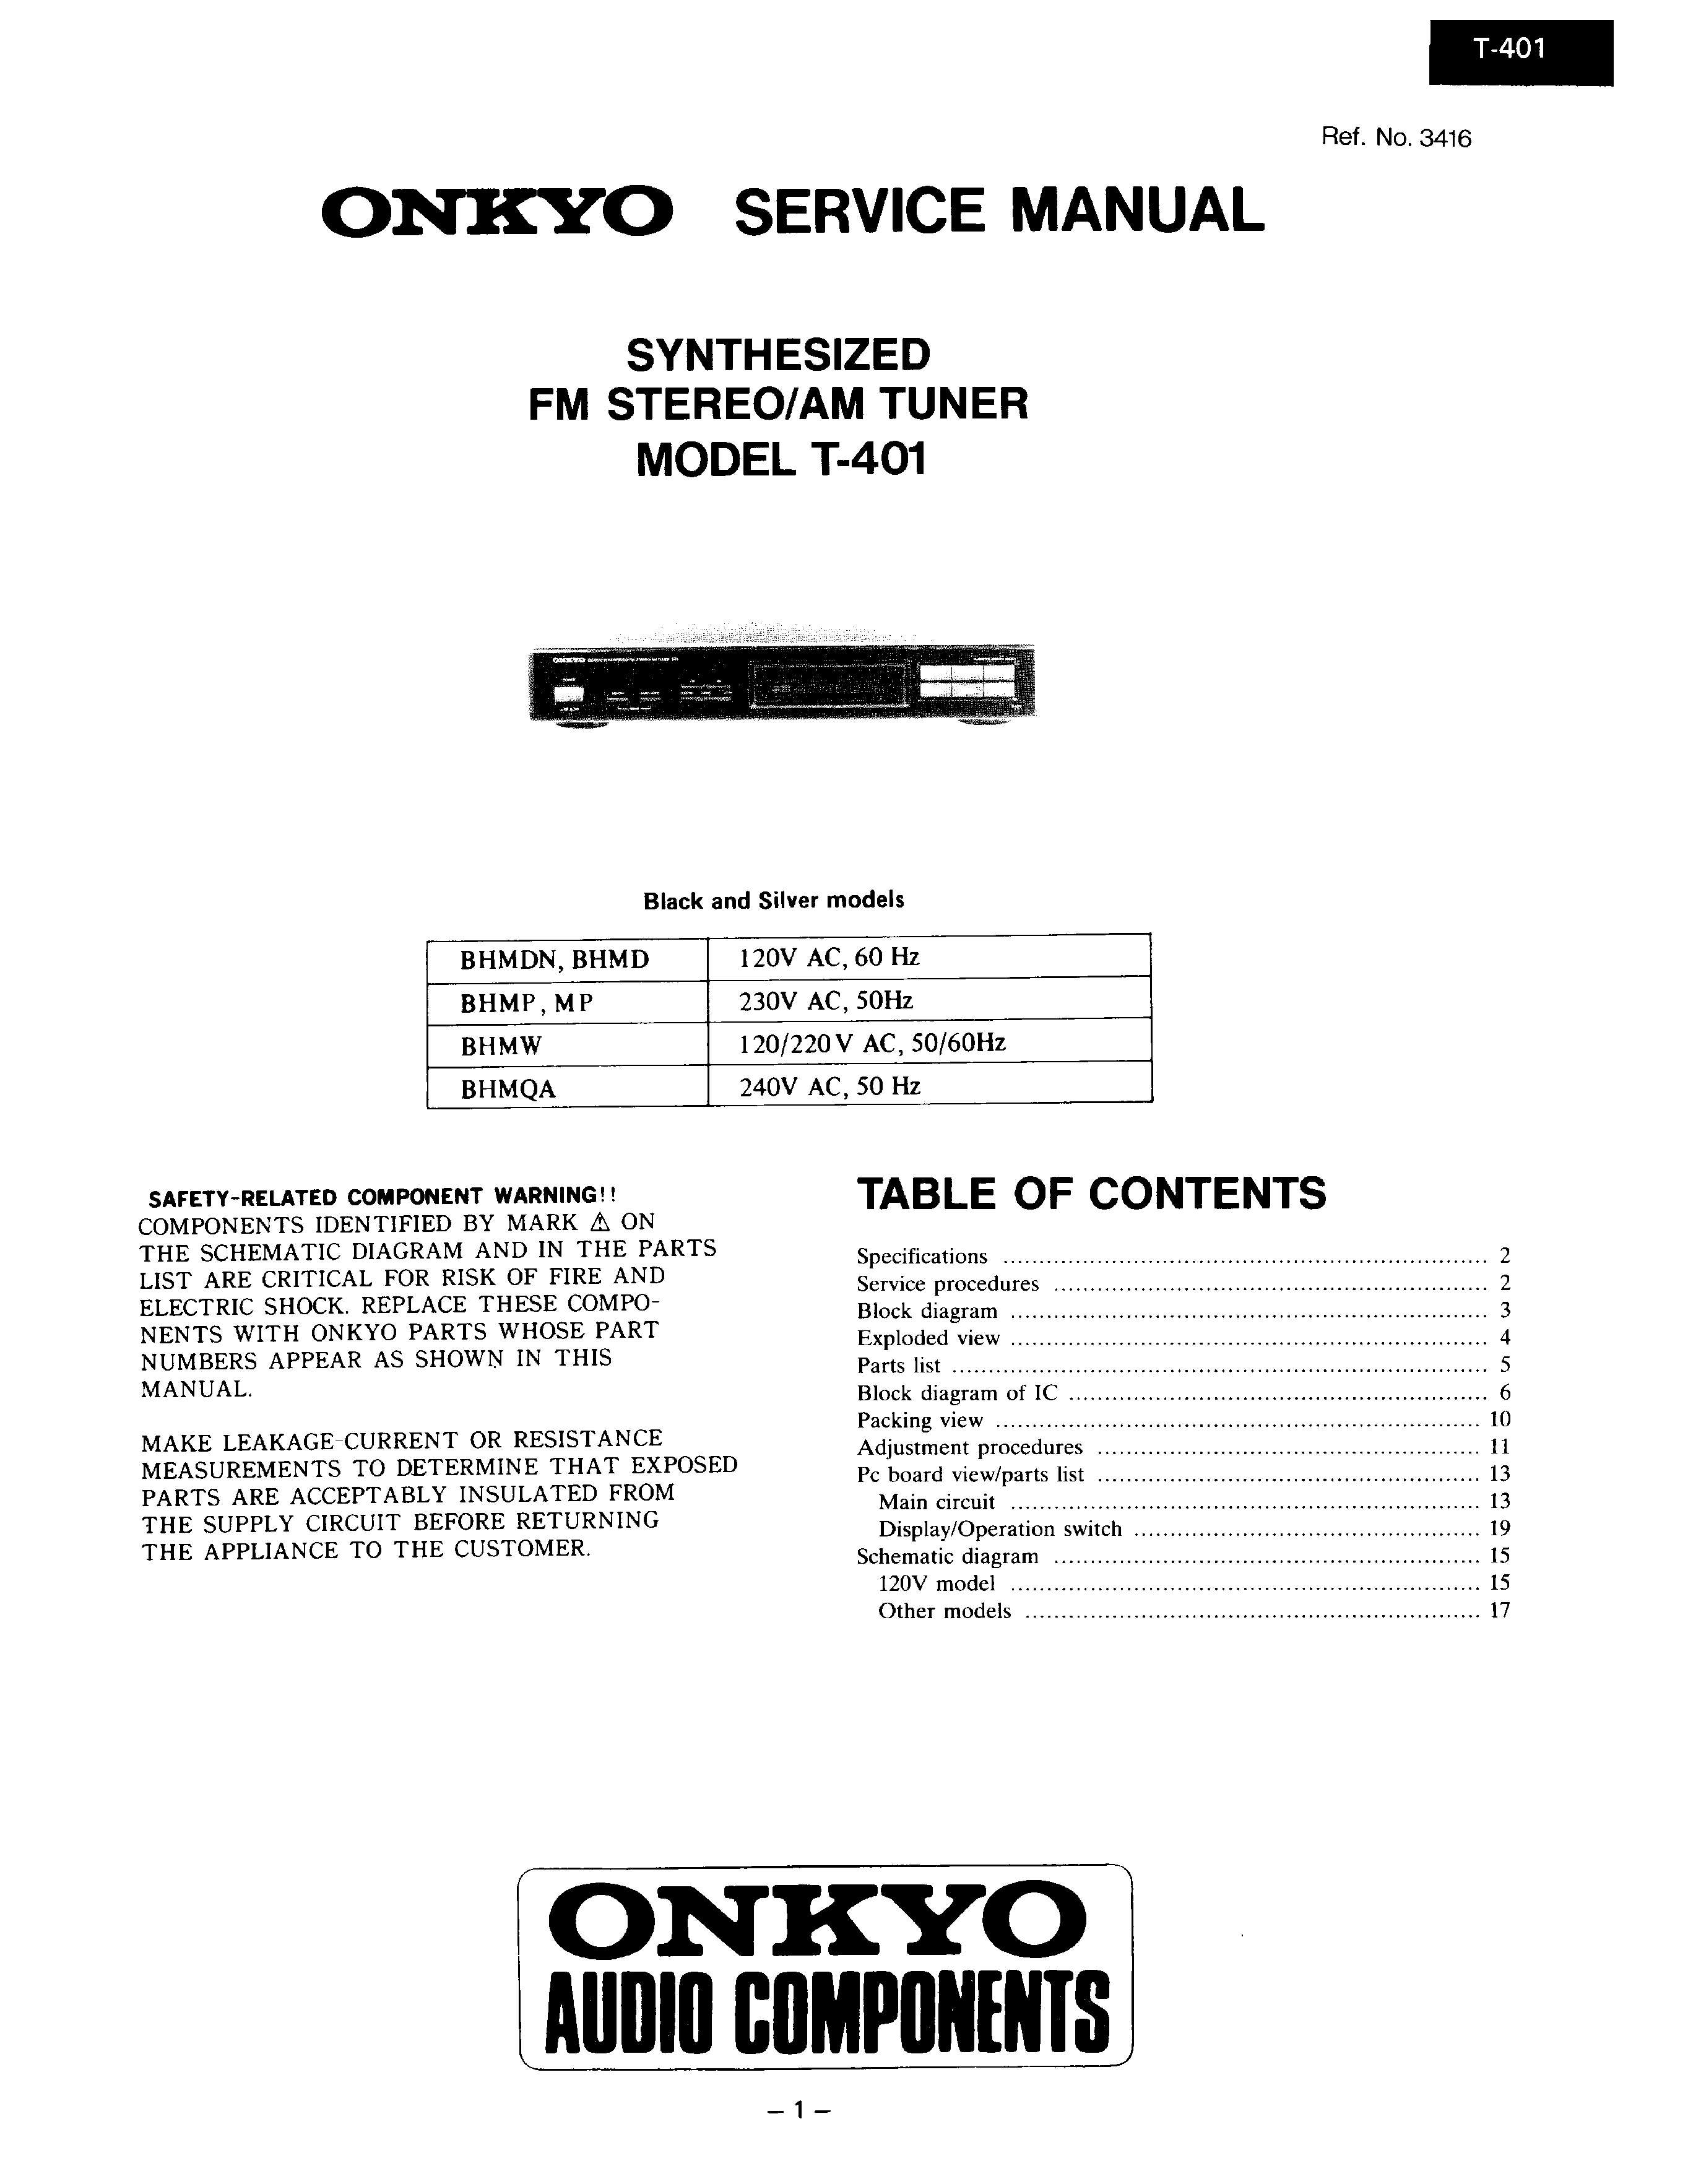 onkyo t-401 owner's manual